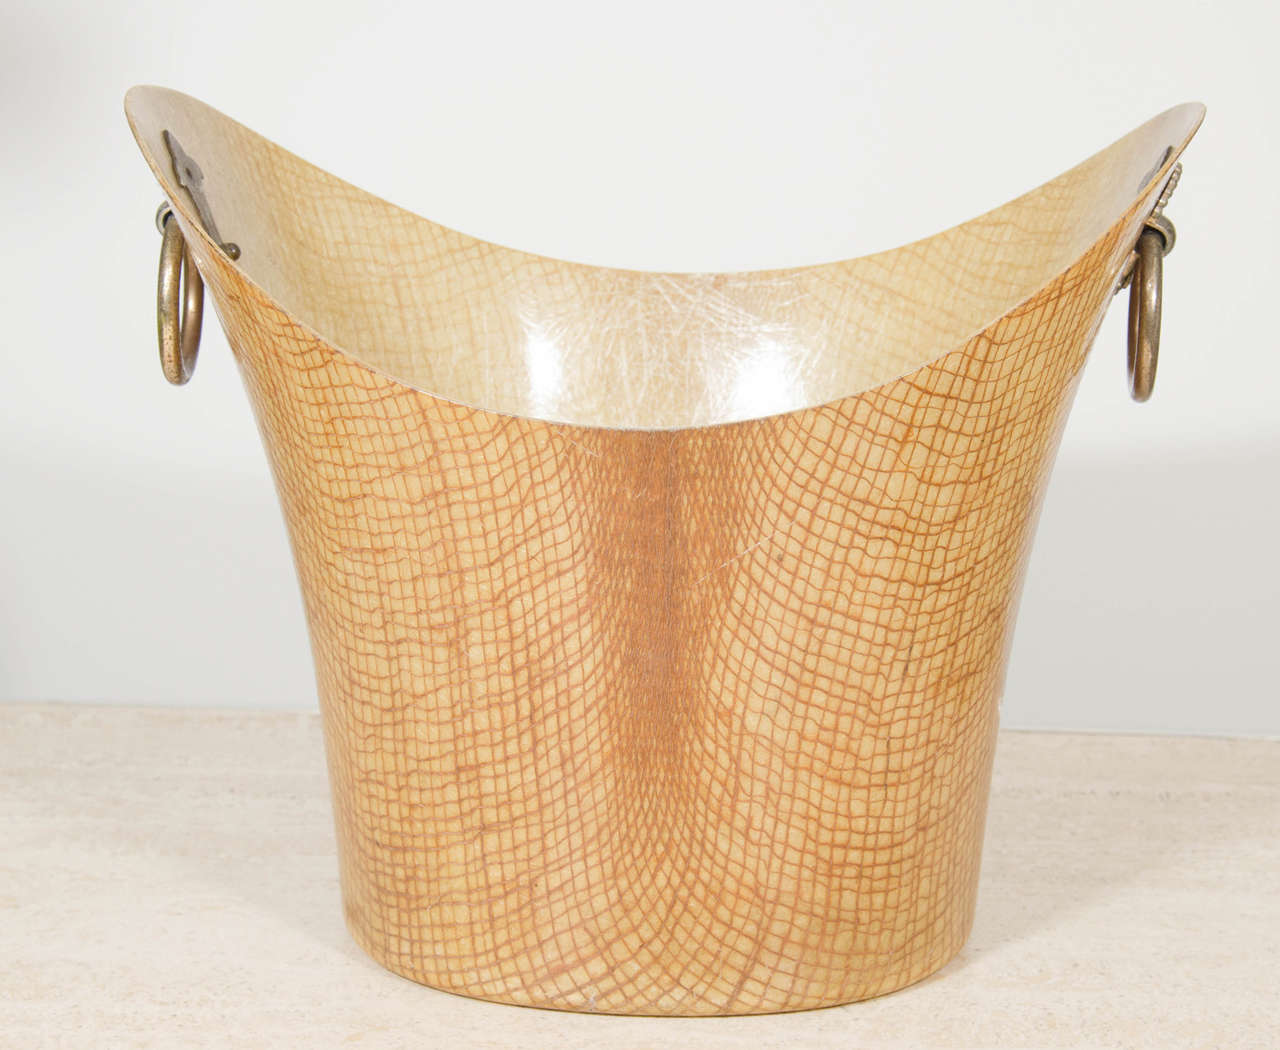 Modernist Kimball laminated trash bin, curved top with ring handles.